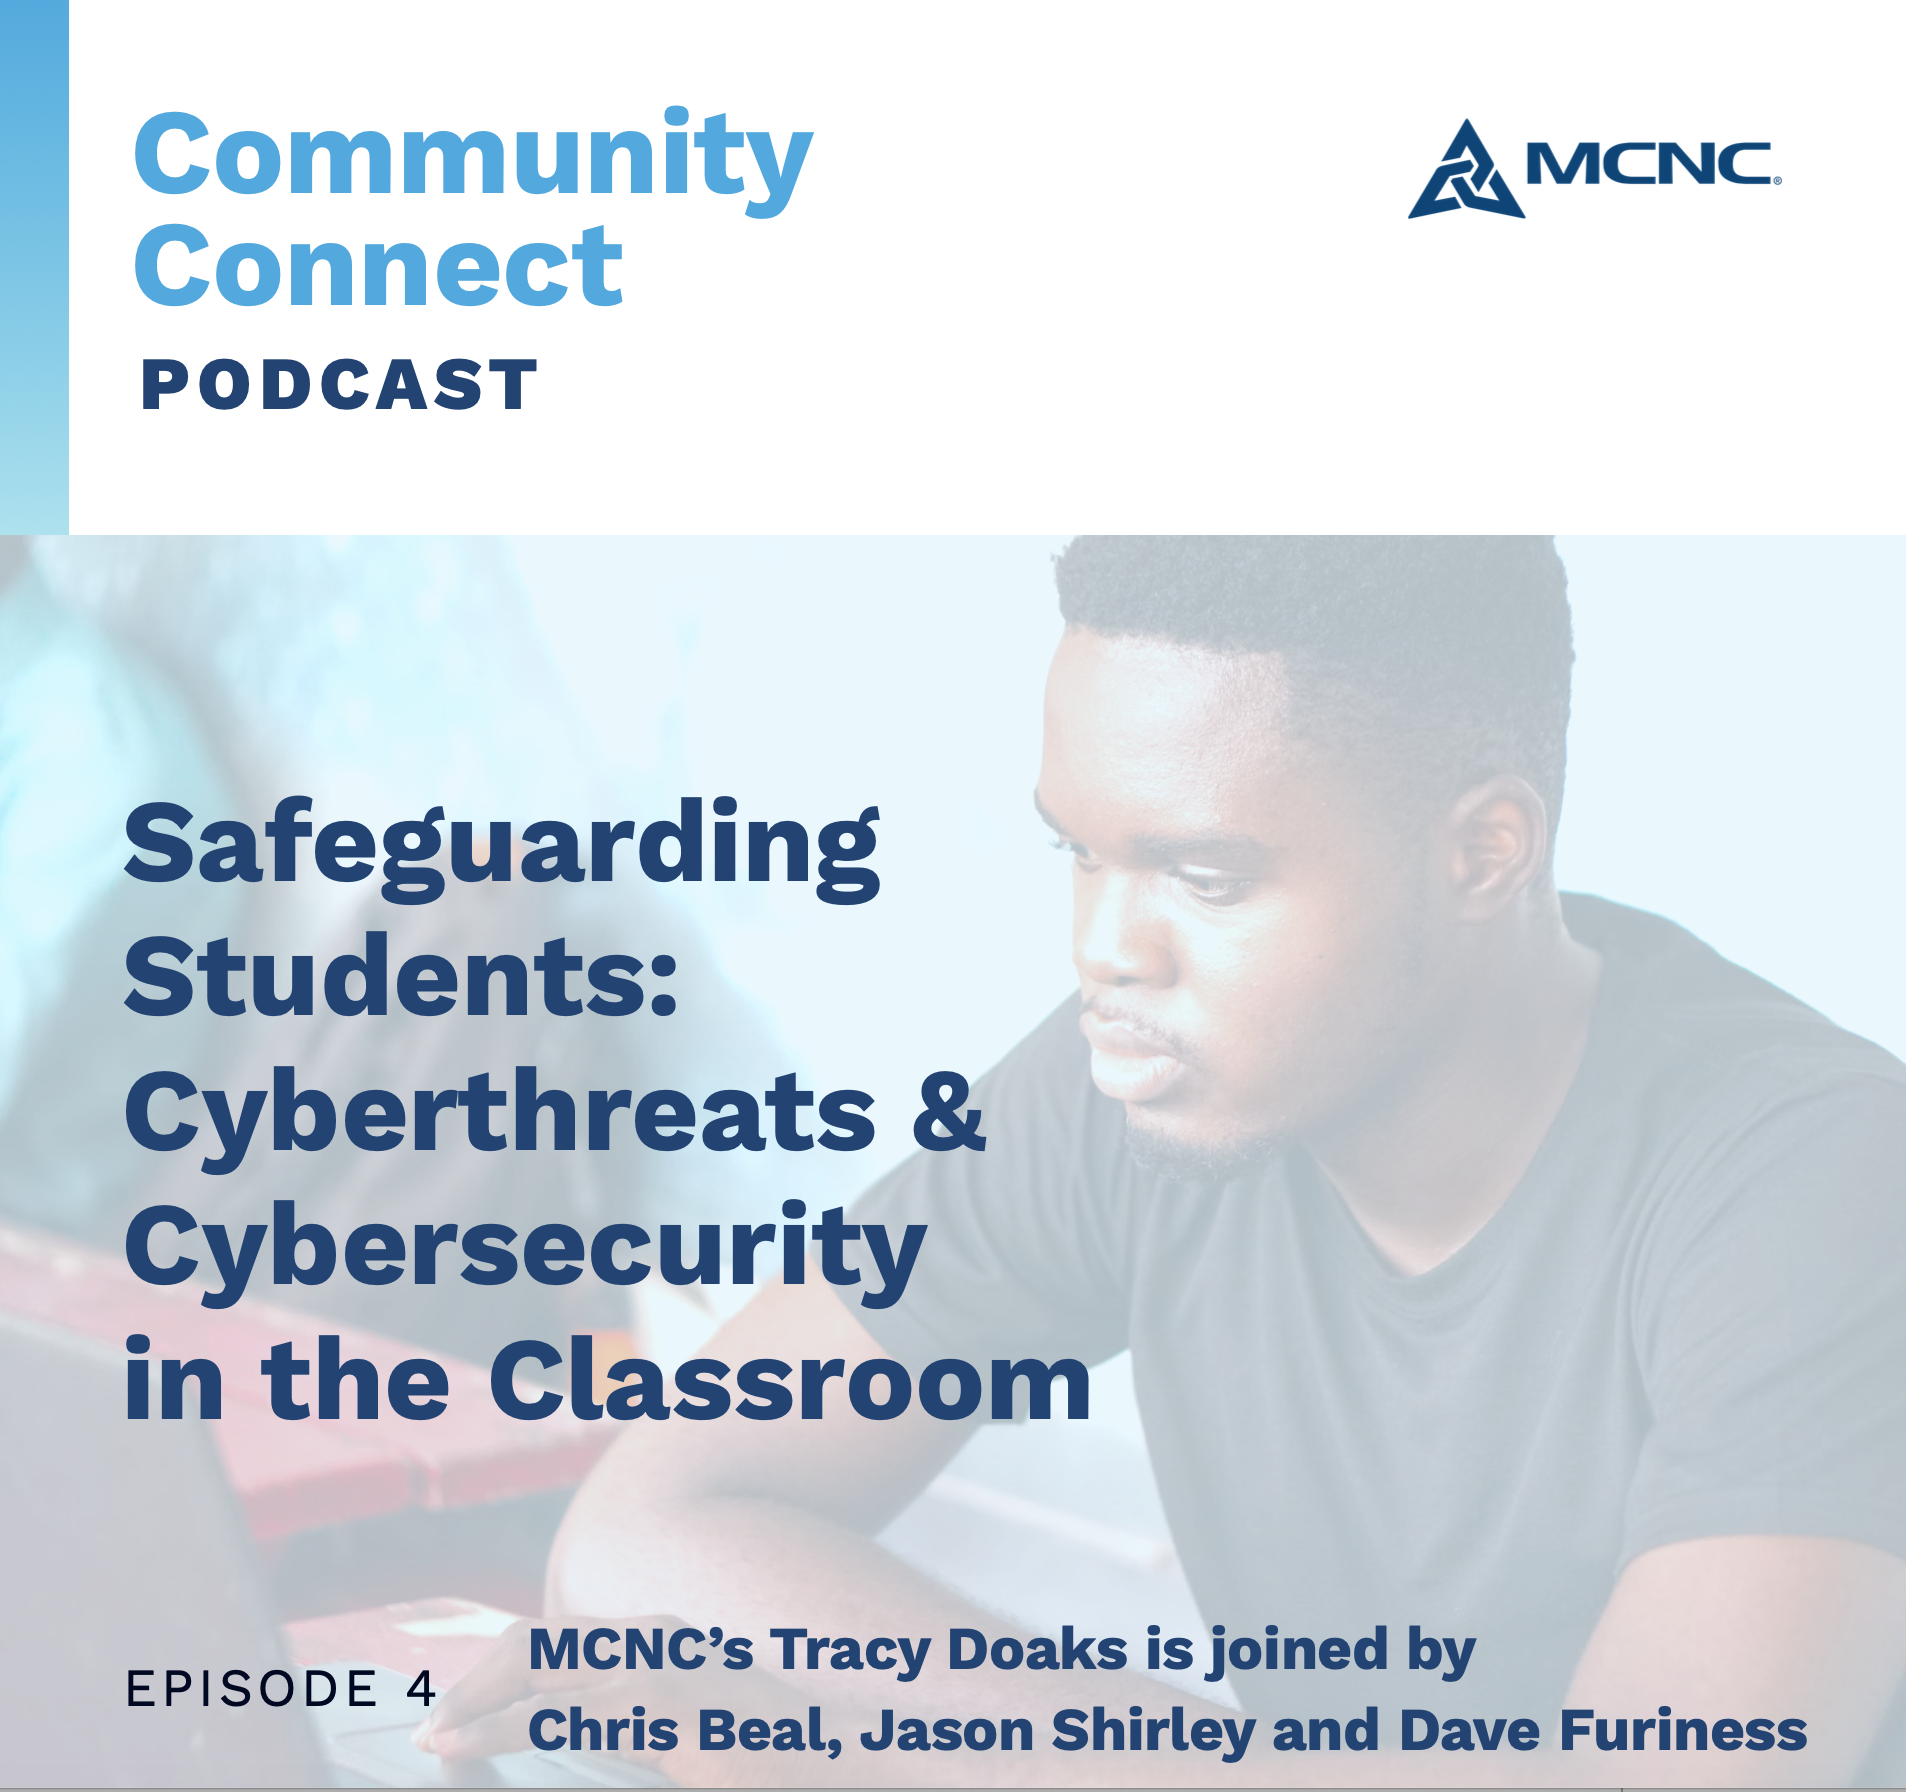 Cyberthreats in the classroom podcast